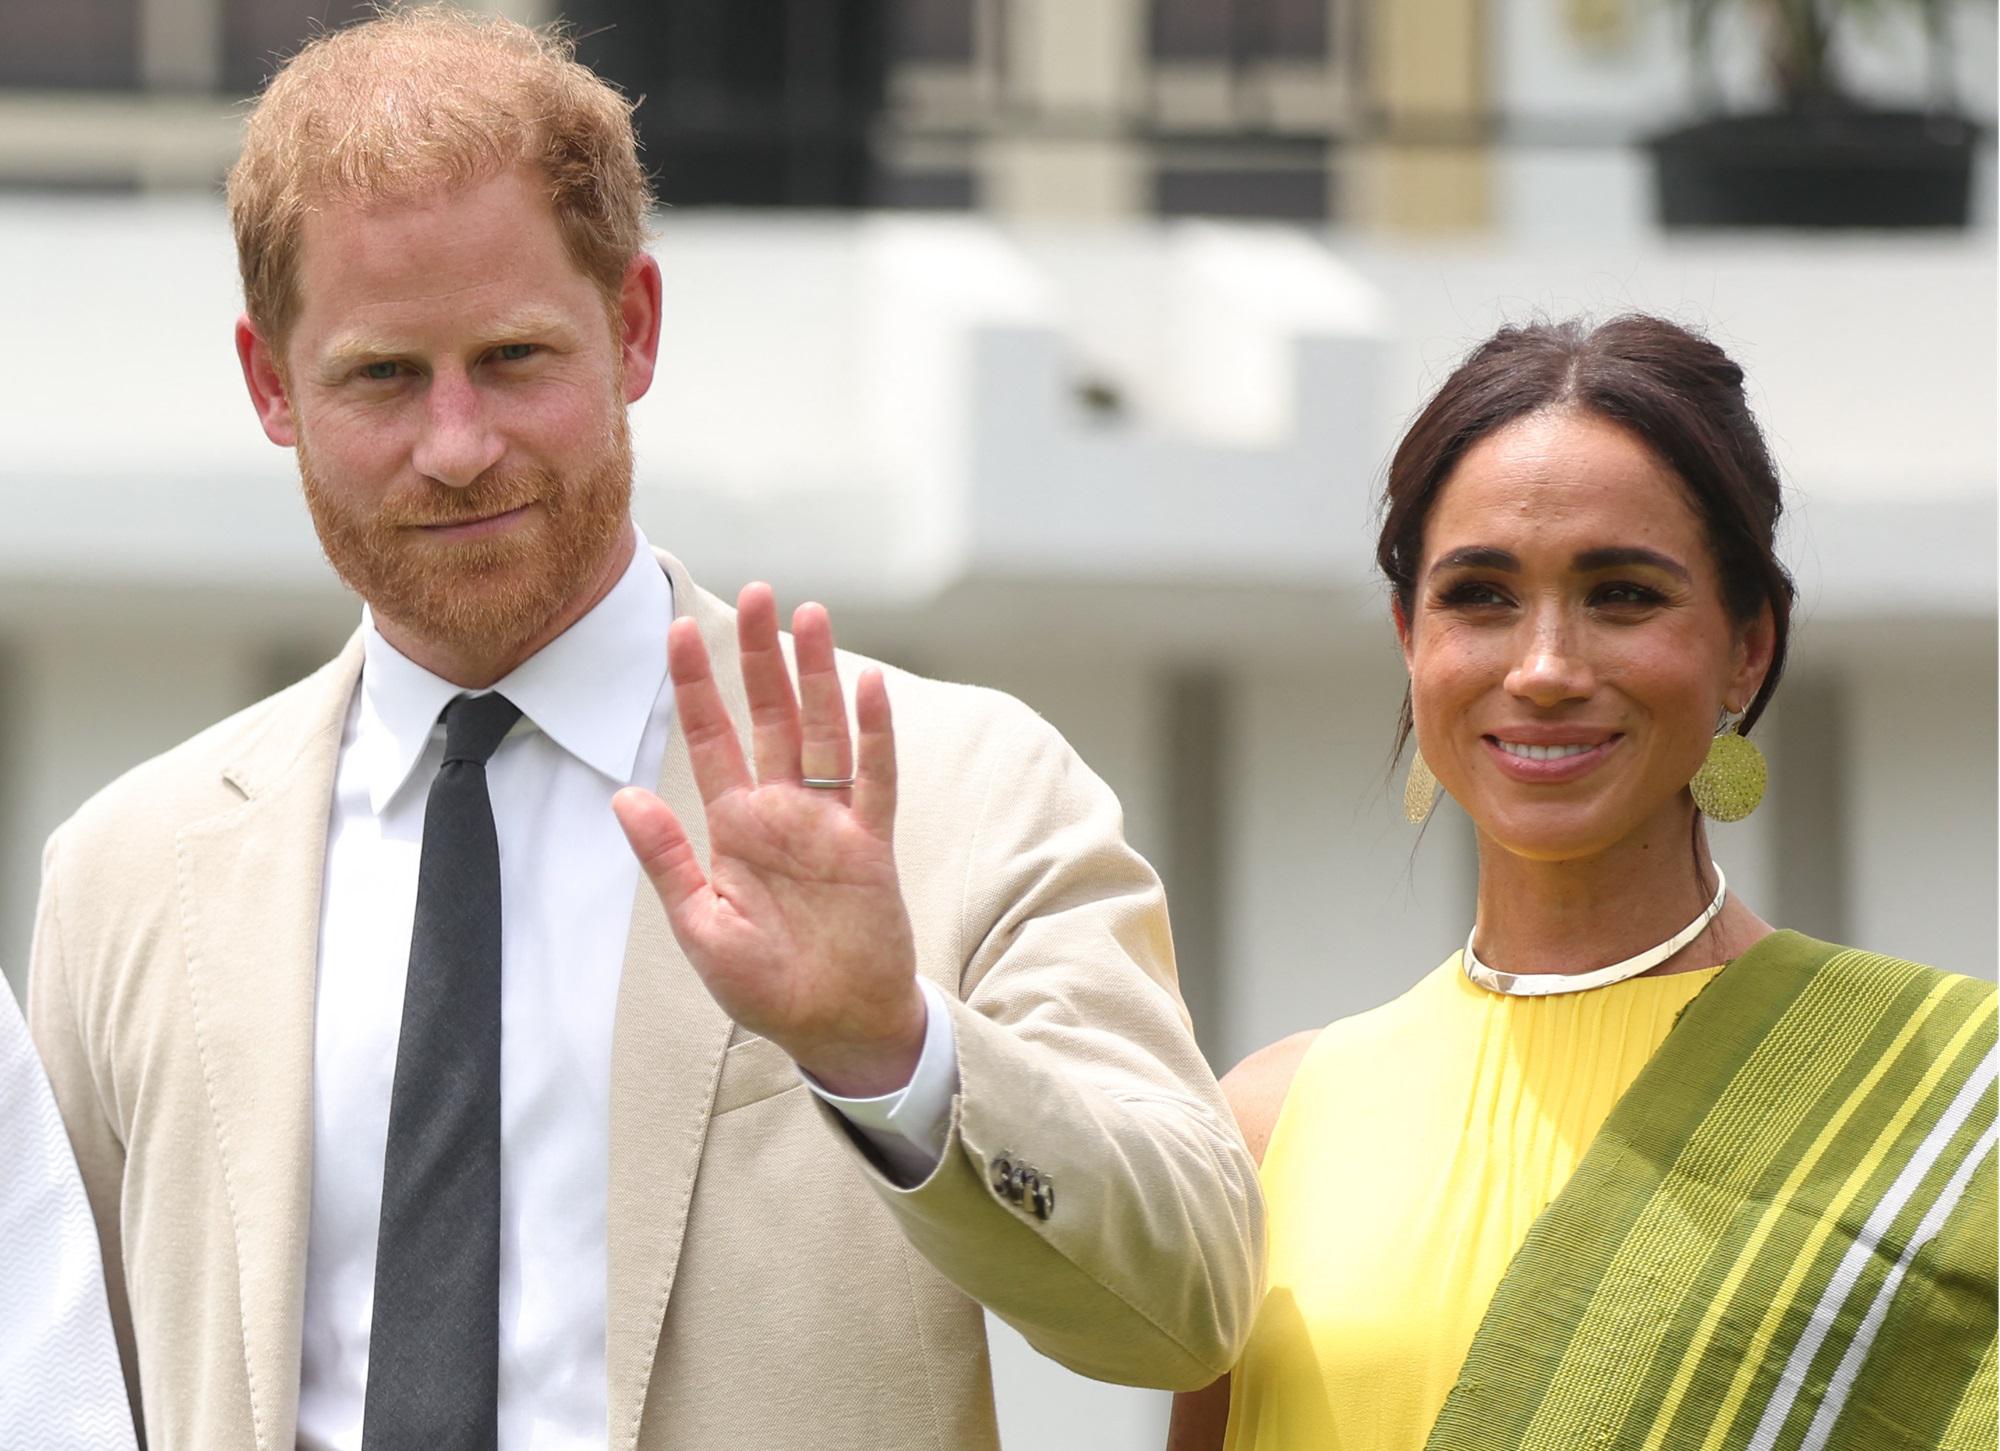 Harry and Meghan facing issues as Archewell foundation found to be ‘non-compliant’